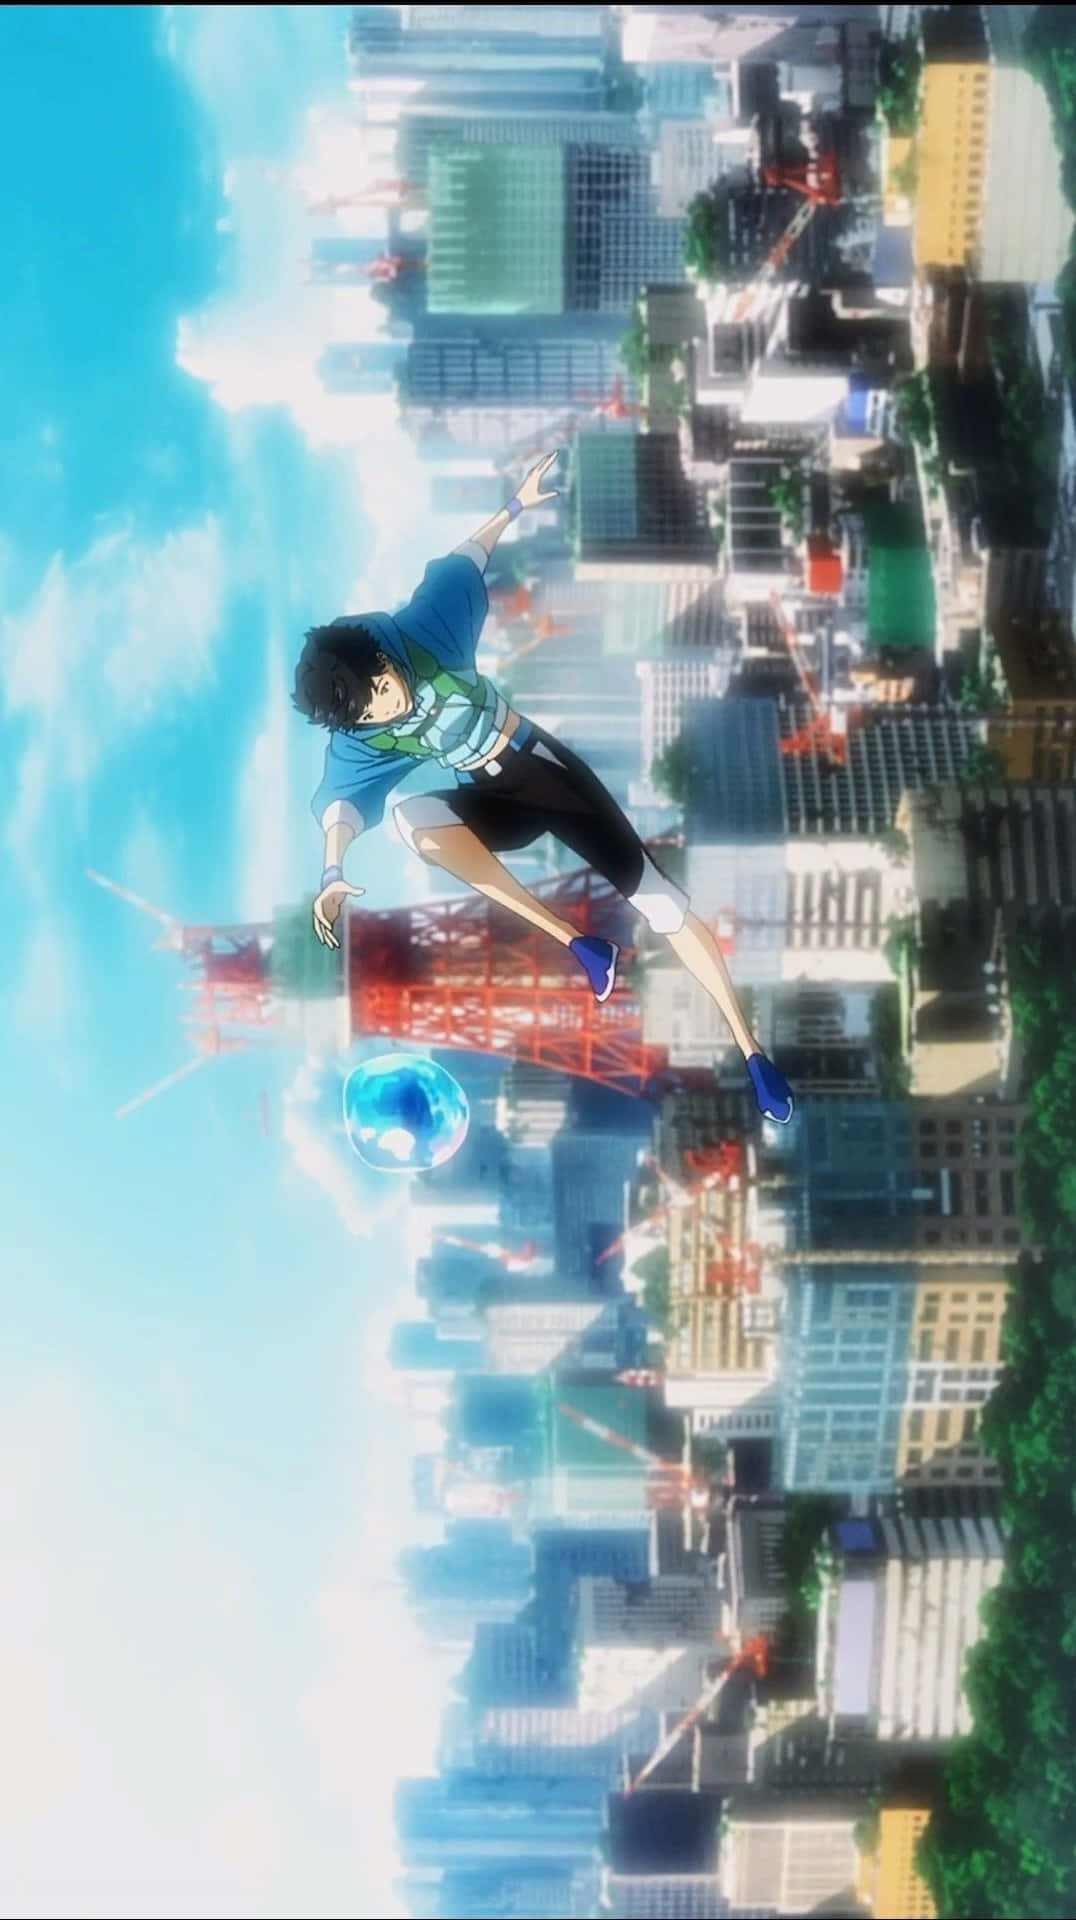 Boy Jumping In The City With Bubble Anime Portrait Wallpaper